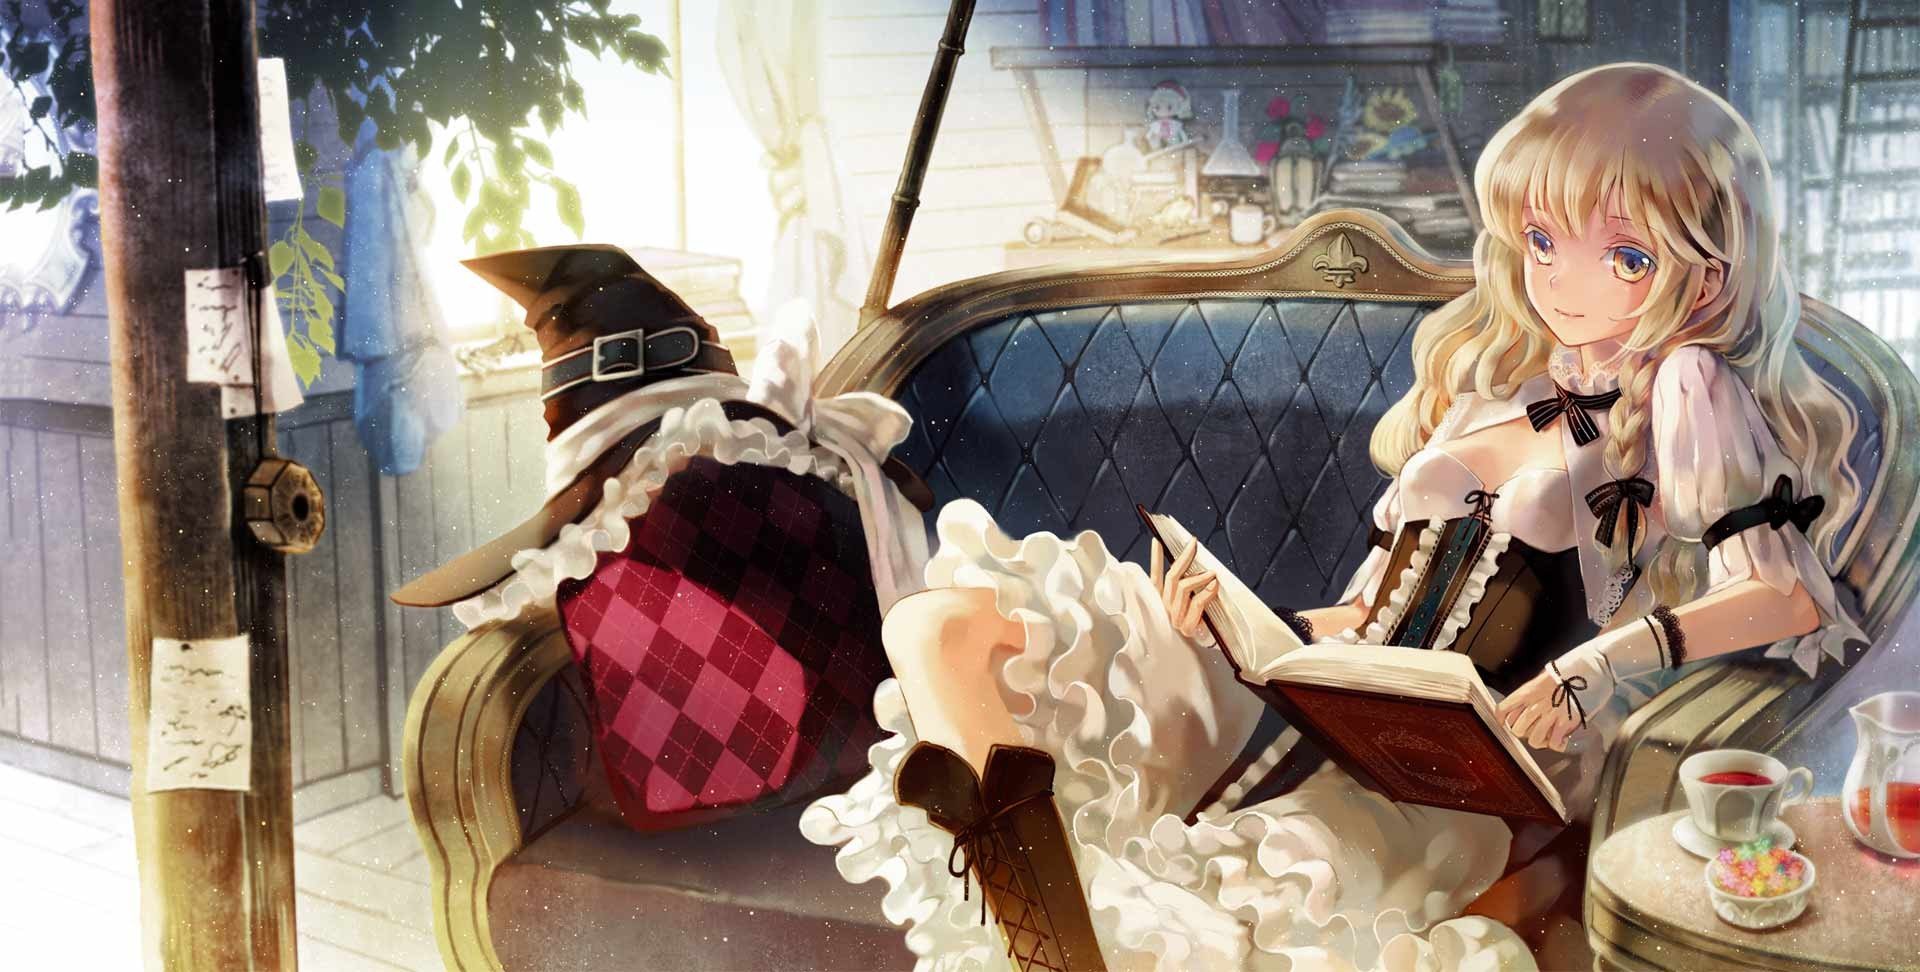 boots, Blondes, Video, Games, Touhou, Couch, Dress, Indoors, Tea, Room, Reading, Cups, Long, Hair, Corset, Argyle, Pattern, Books, Yellow, Eyes, Pillows, Kirisame, Marisa, Smiling, Bows, Braids, White, Dress, Ha Wallpaper